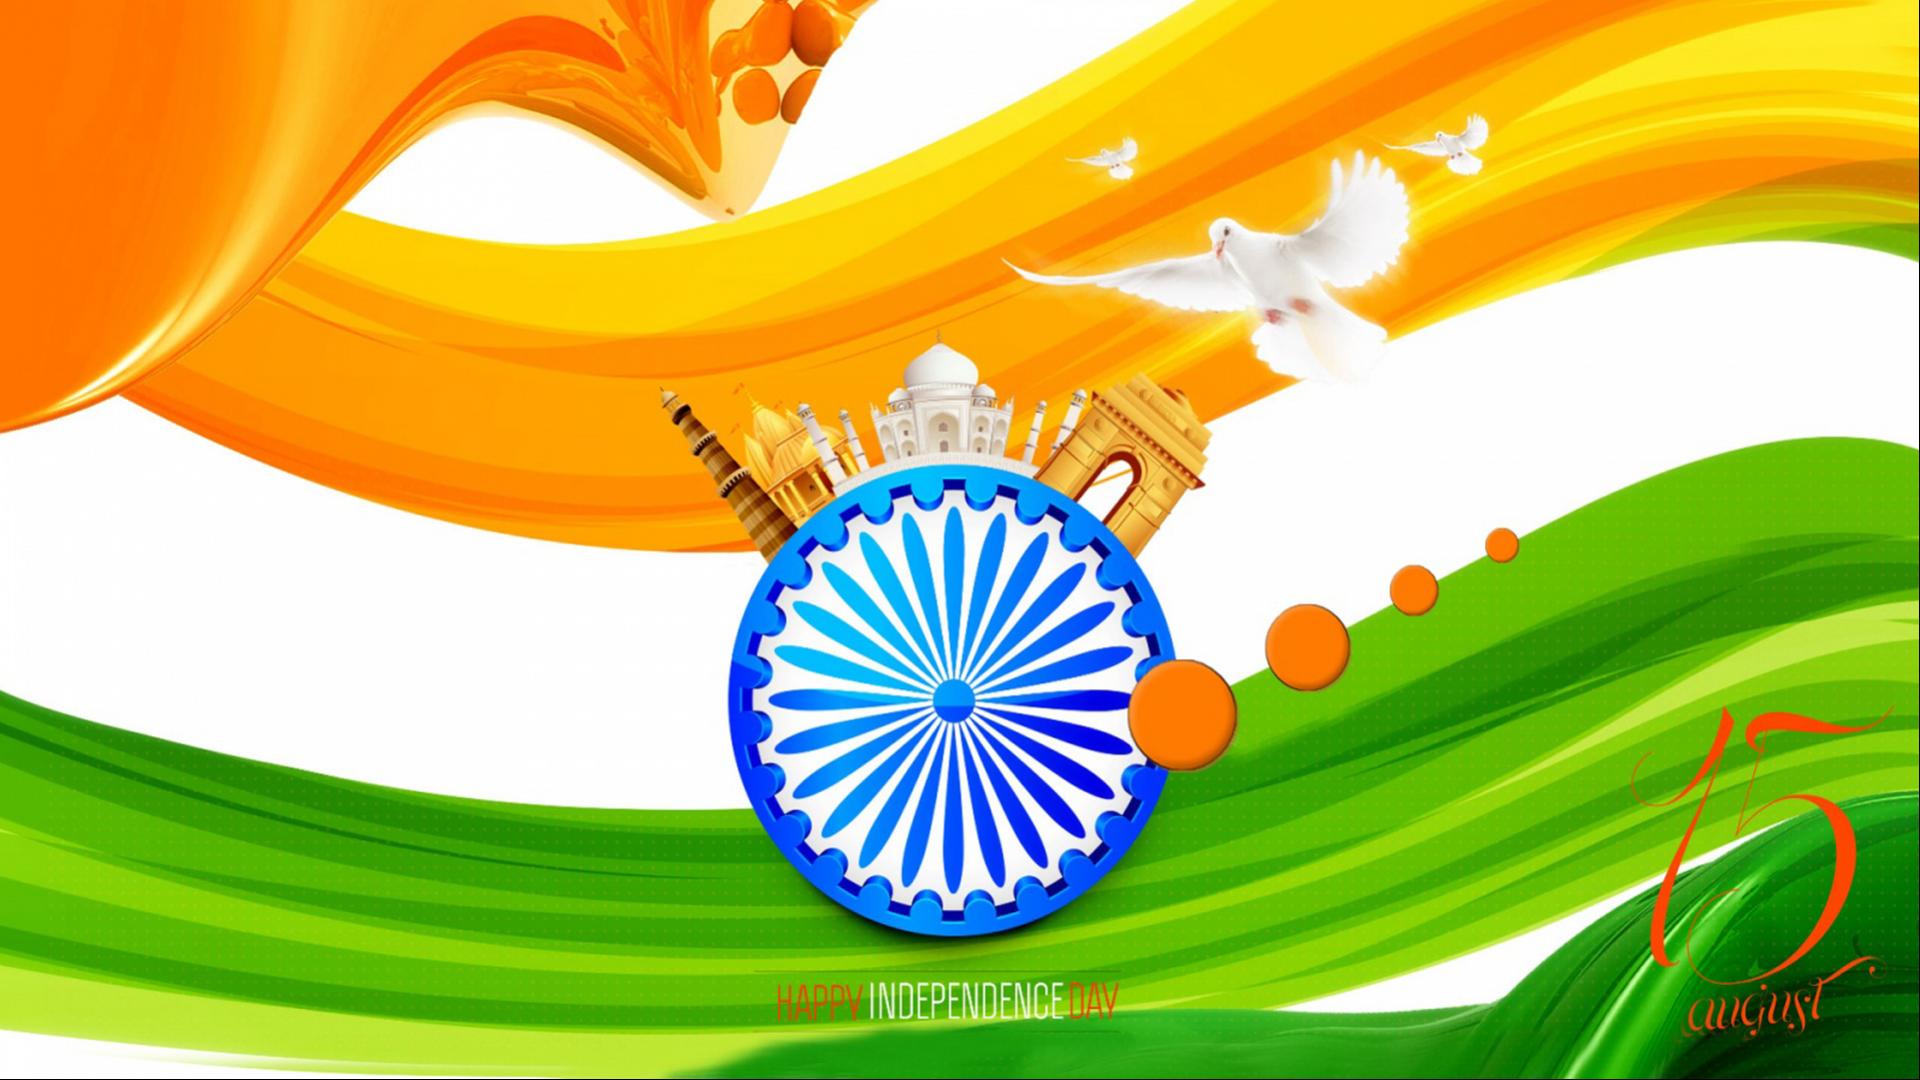 India Independence Day Wallpaper in HD with 1920x1080 Wallpaper. Wallpaper Download. High Resolution Wallpaper